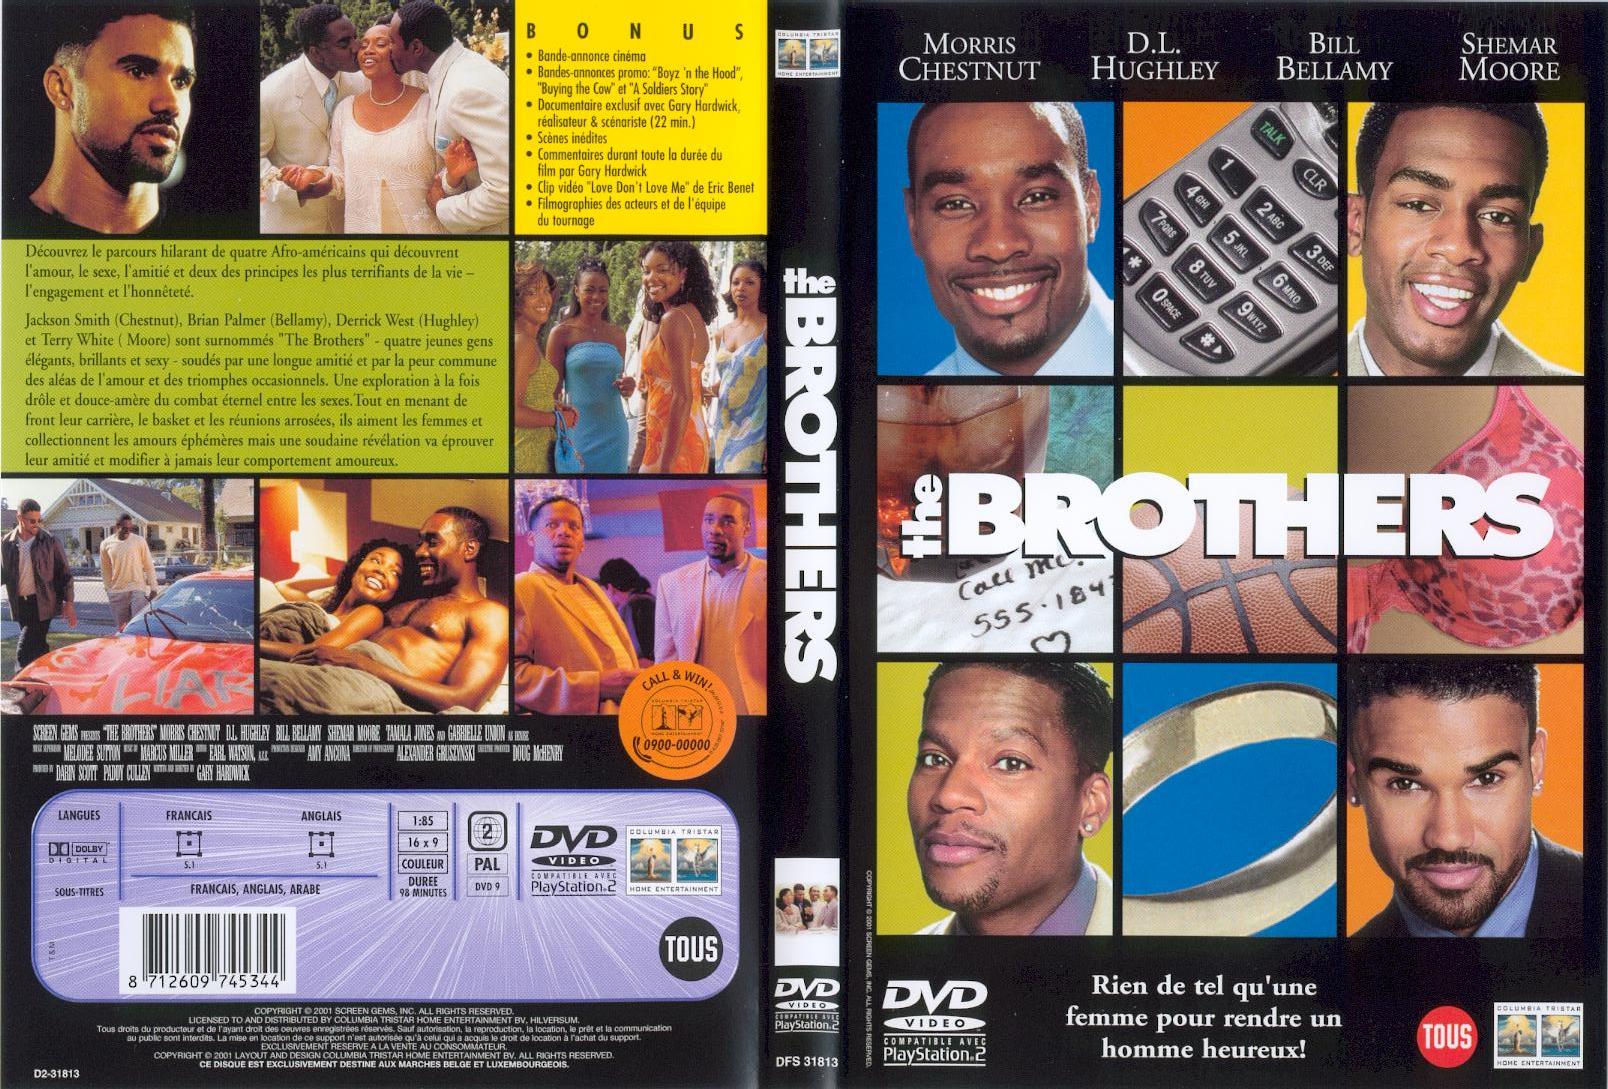 Jaquette DVD The Brothers